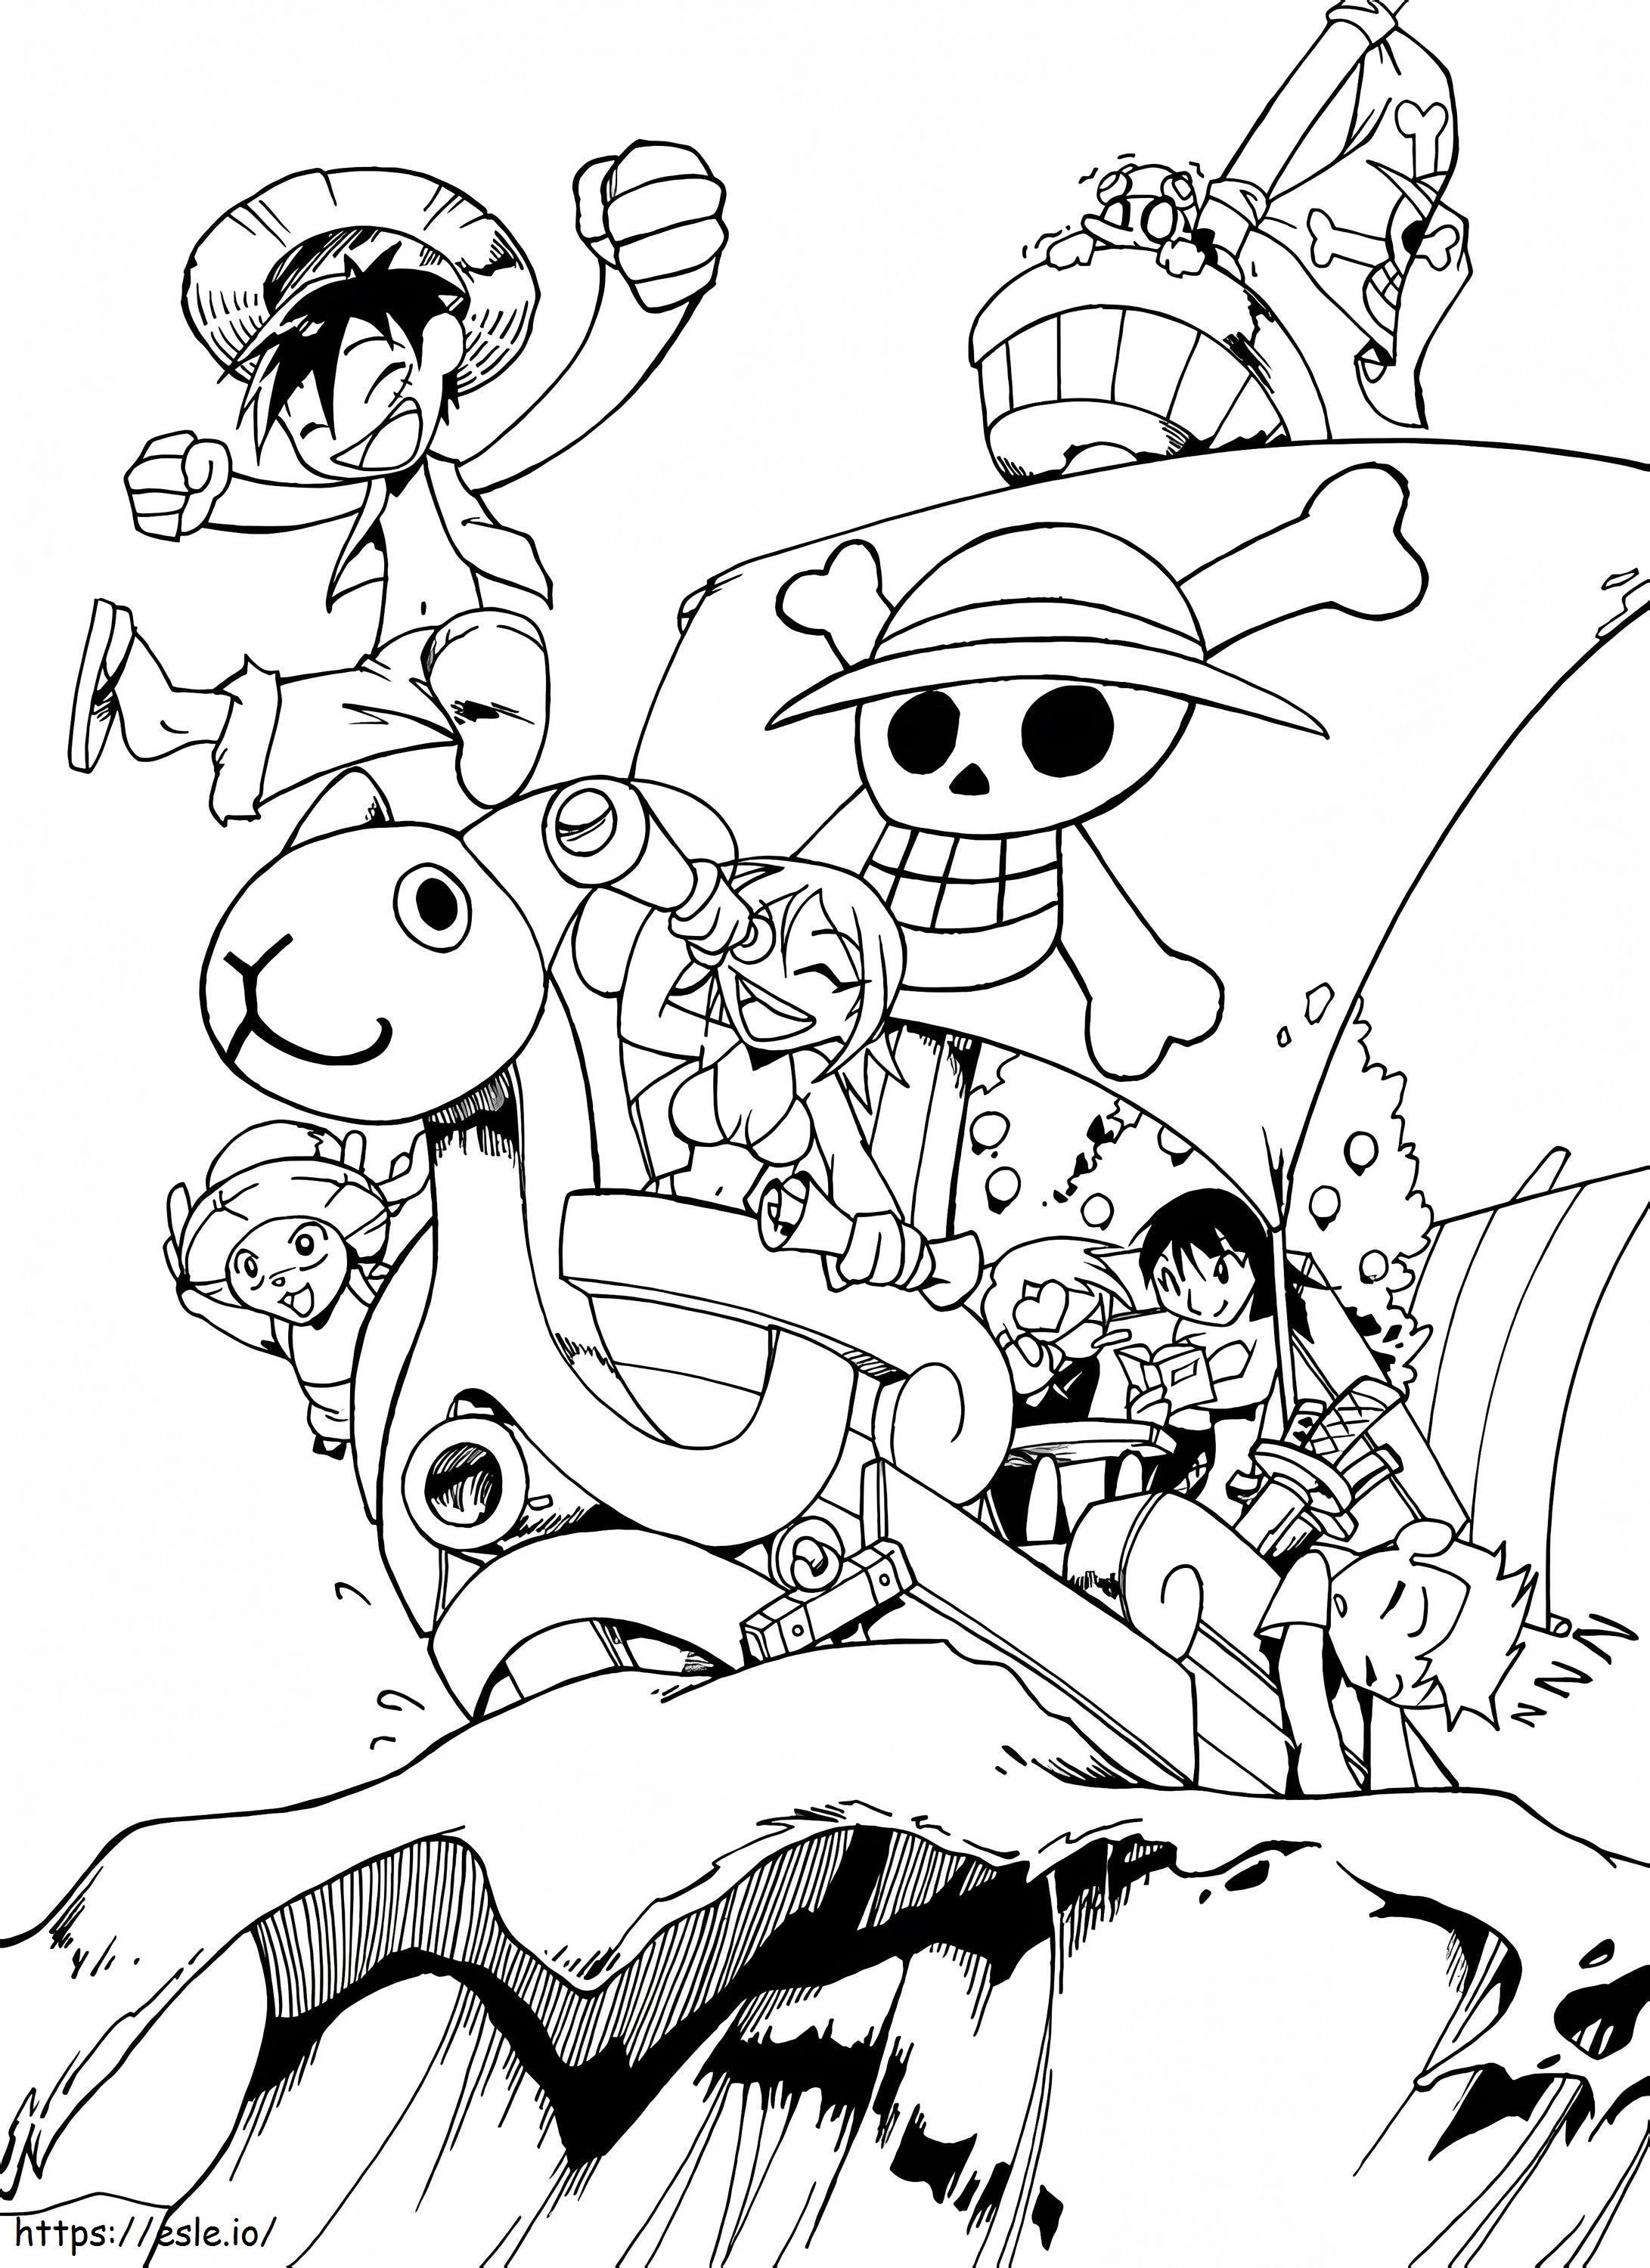 1585557116 For Children One Piece 49120 coloring page